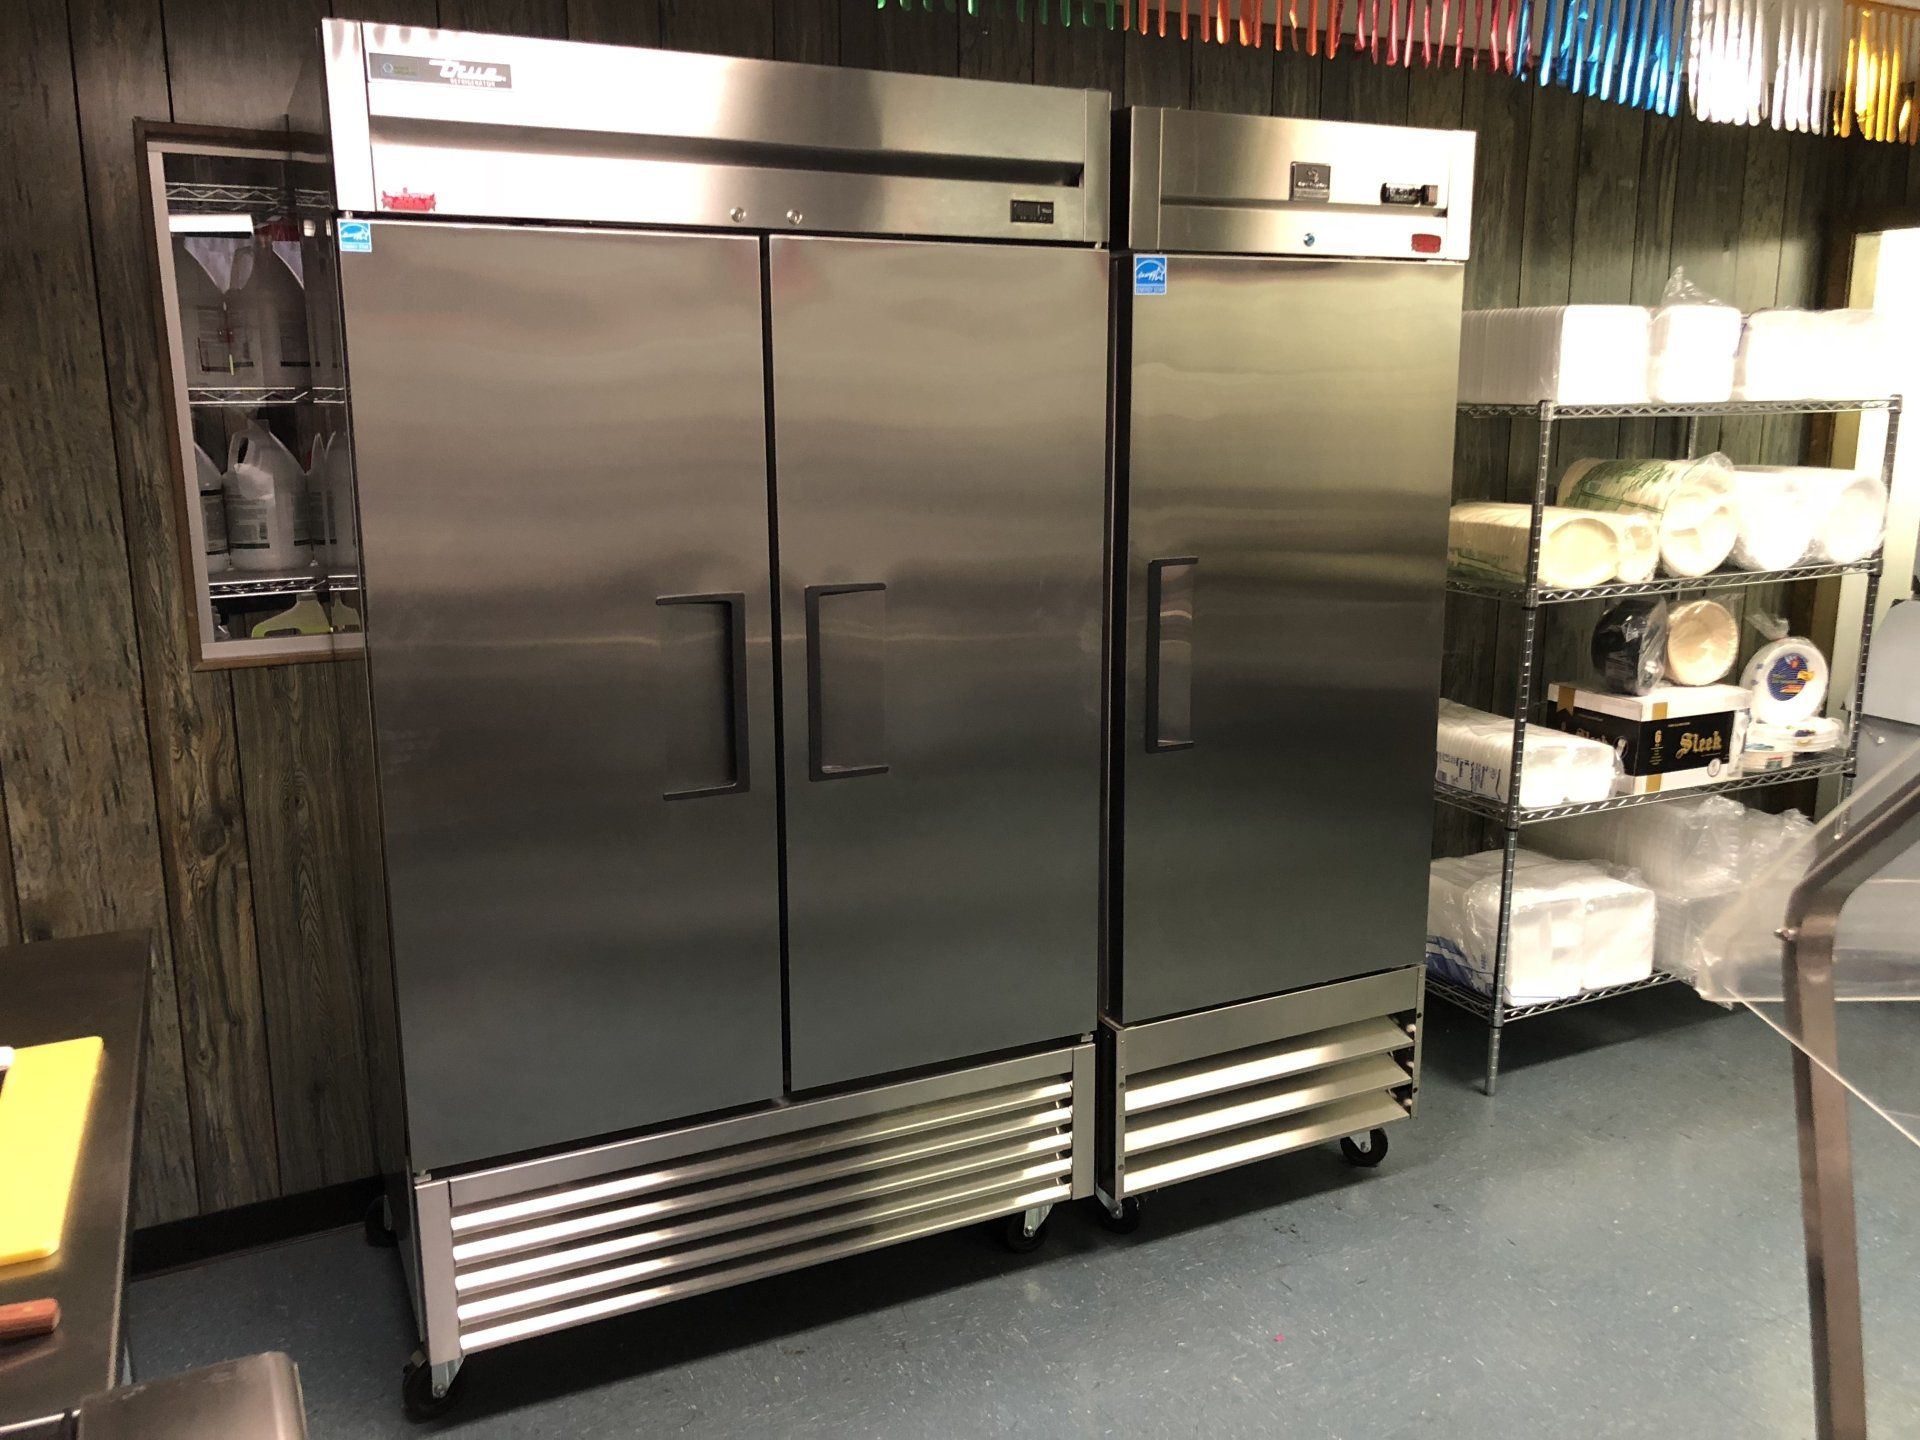 Two stainless steel refrigerators are sitting next to each other in a kitchen.